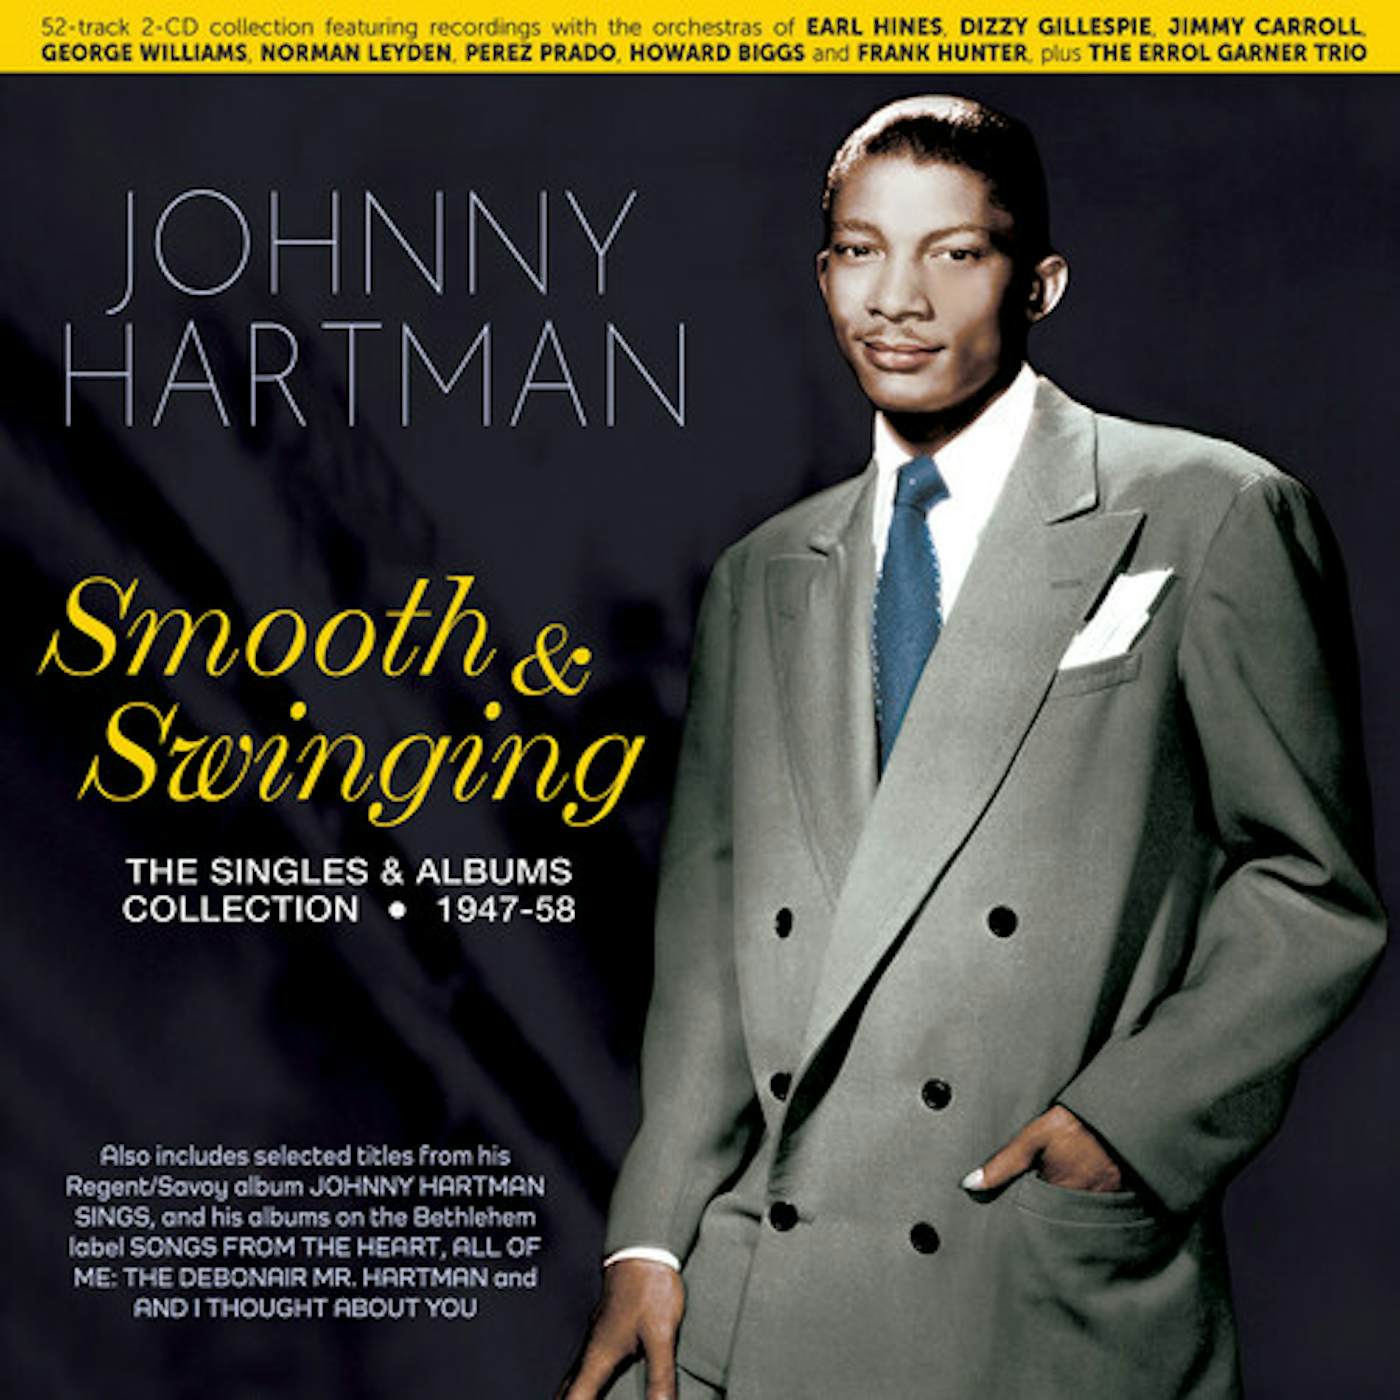 Johnny Hartman SMOOTH & SWINGING: THE SINGLES & ALBUMS COLLECTION CD